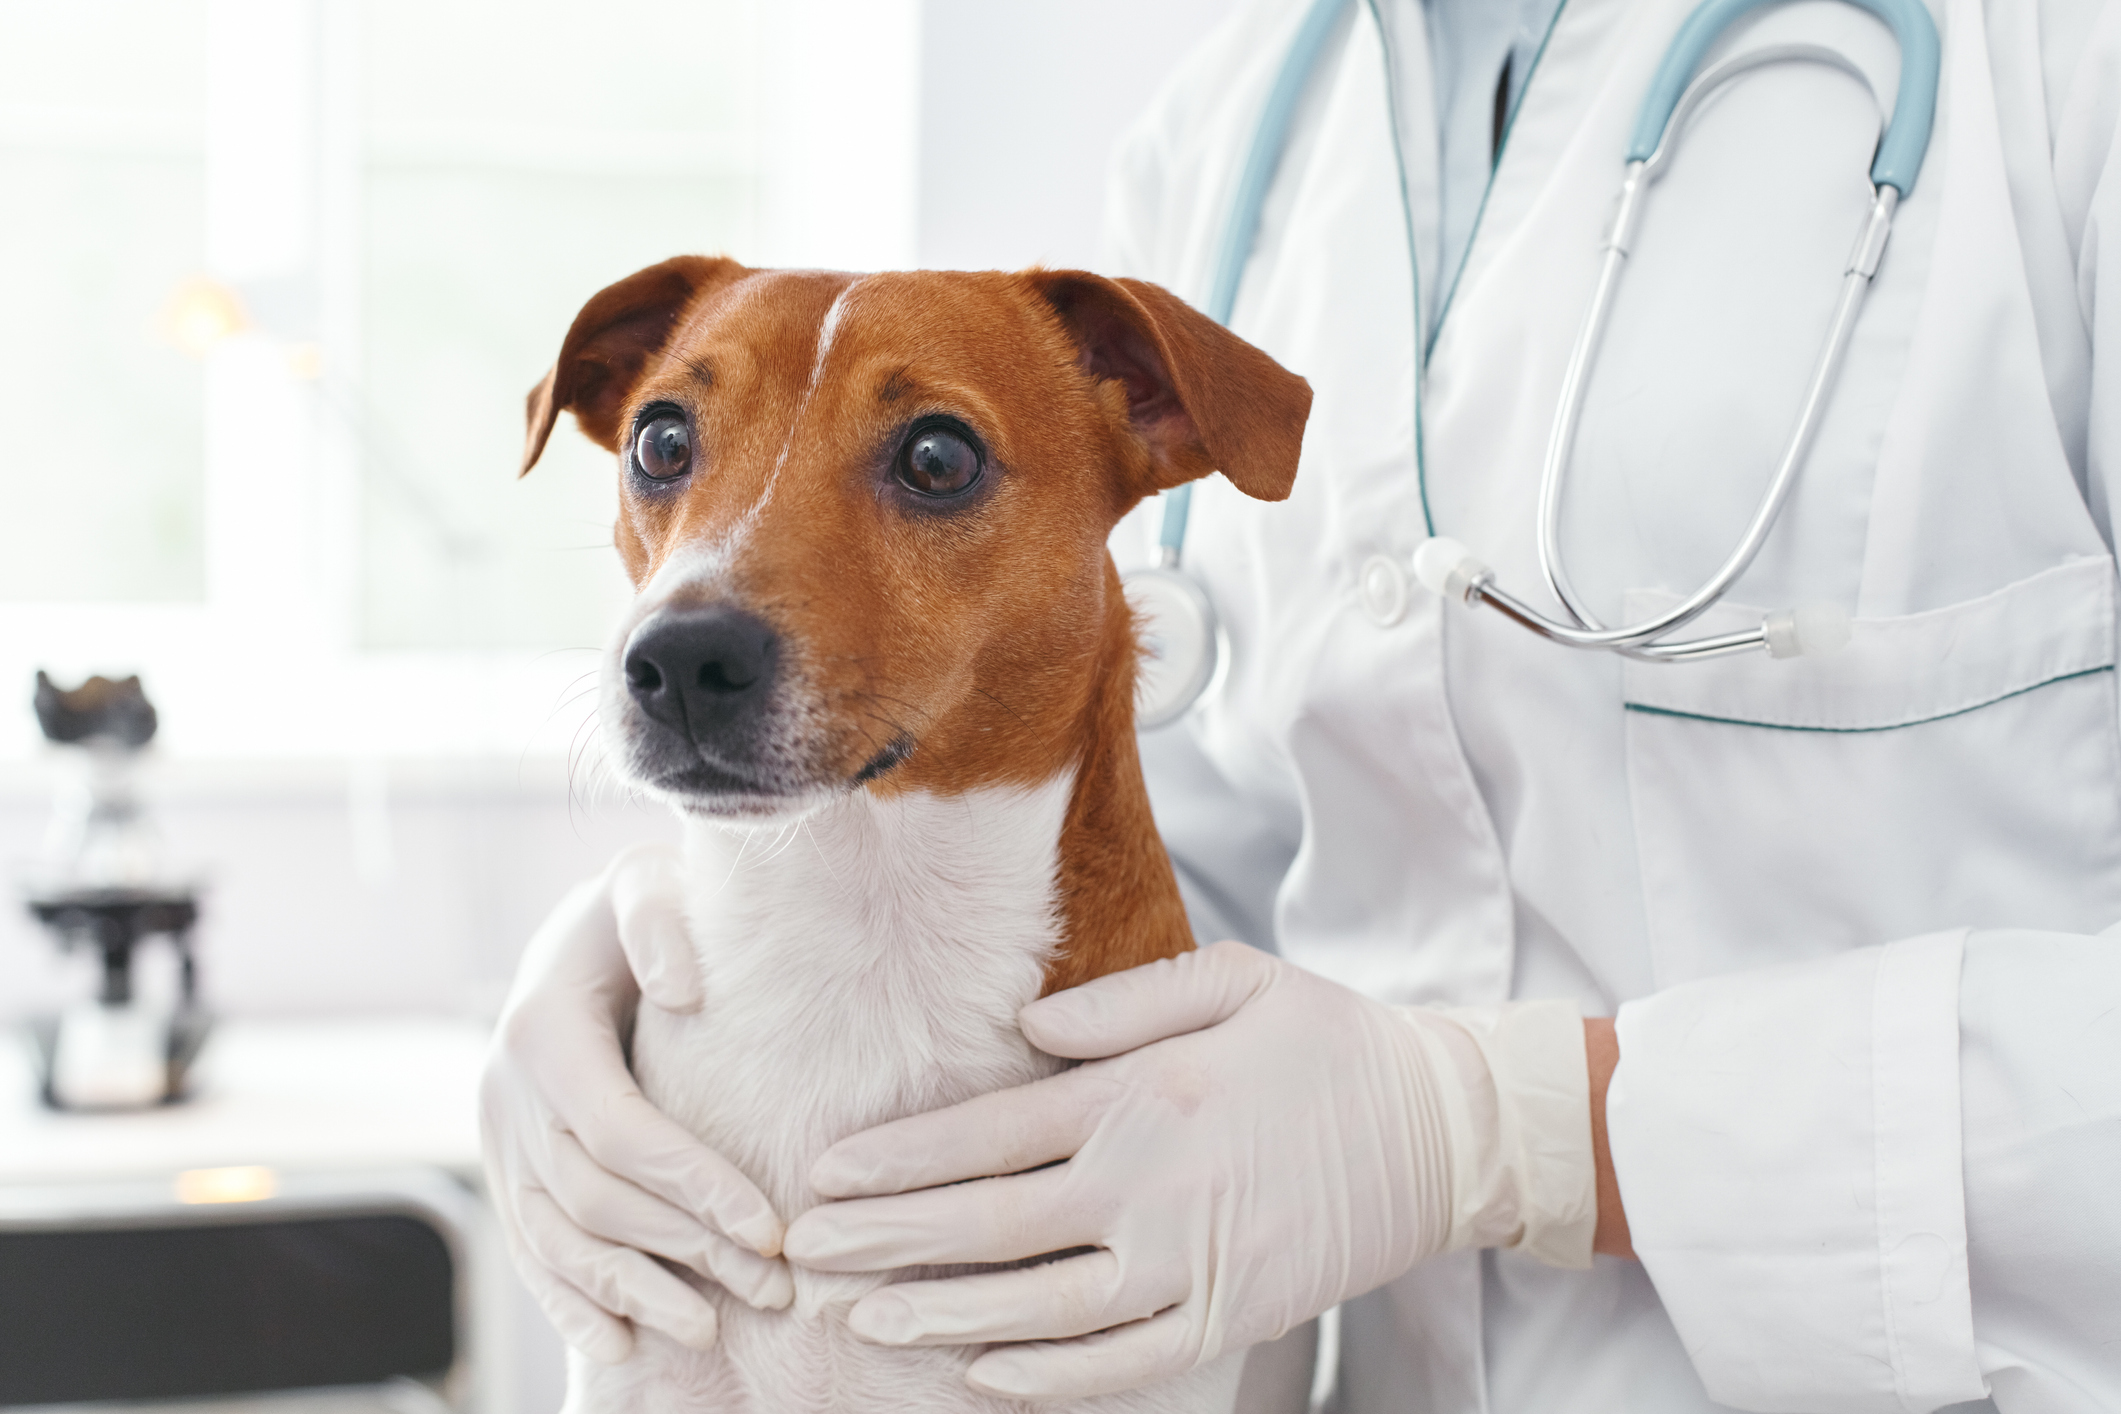 Advanced Animal Hospital of Wisconsin in Greenfield, WI